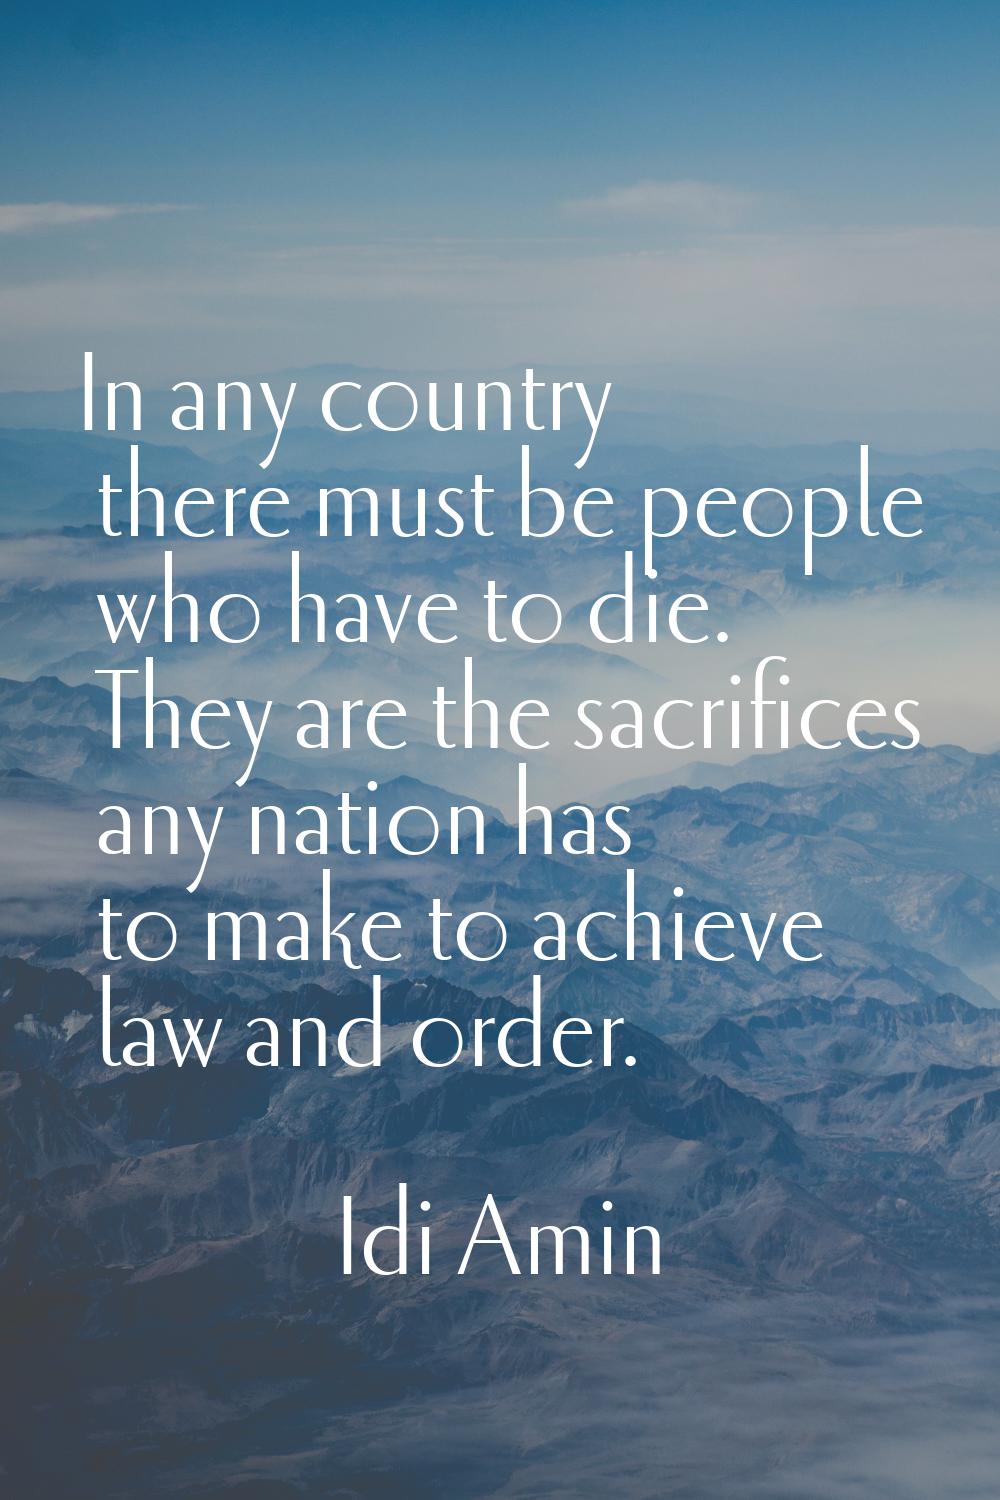 In any country there must be people who have to die. They are the sacrifices any nation has to make